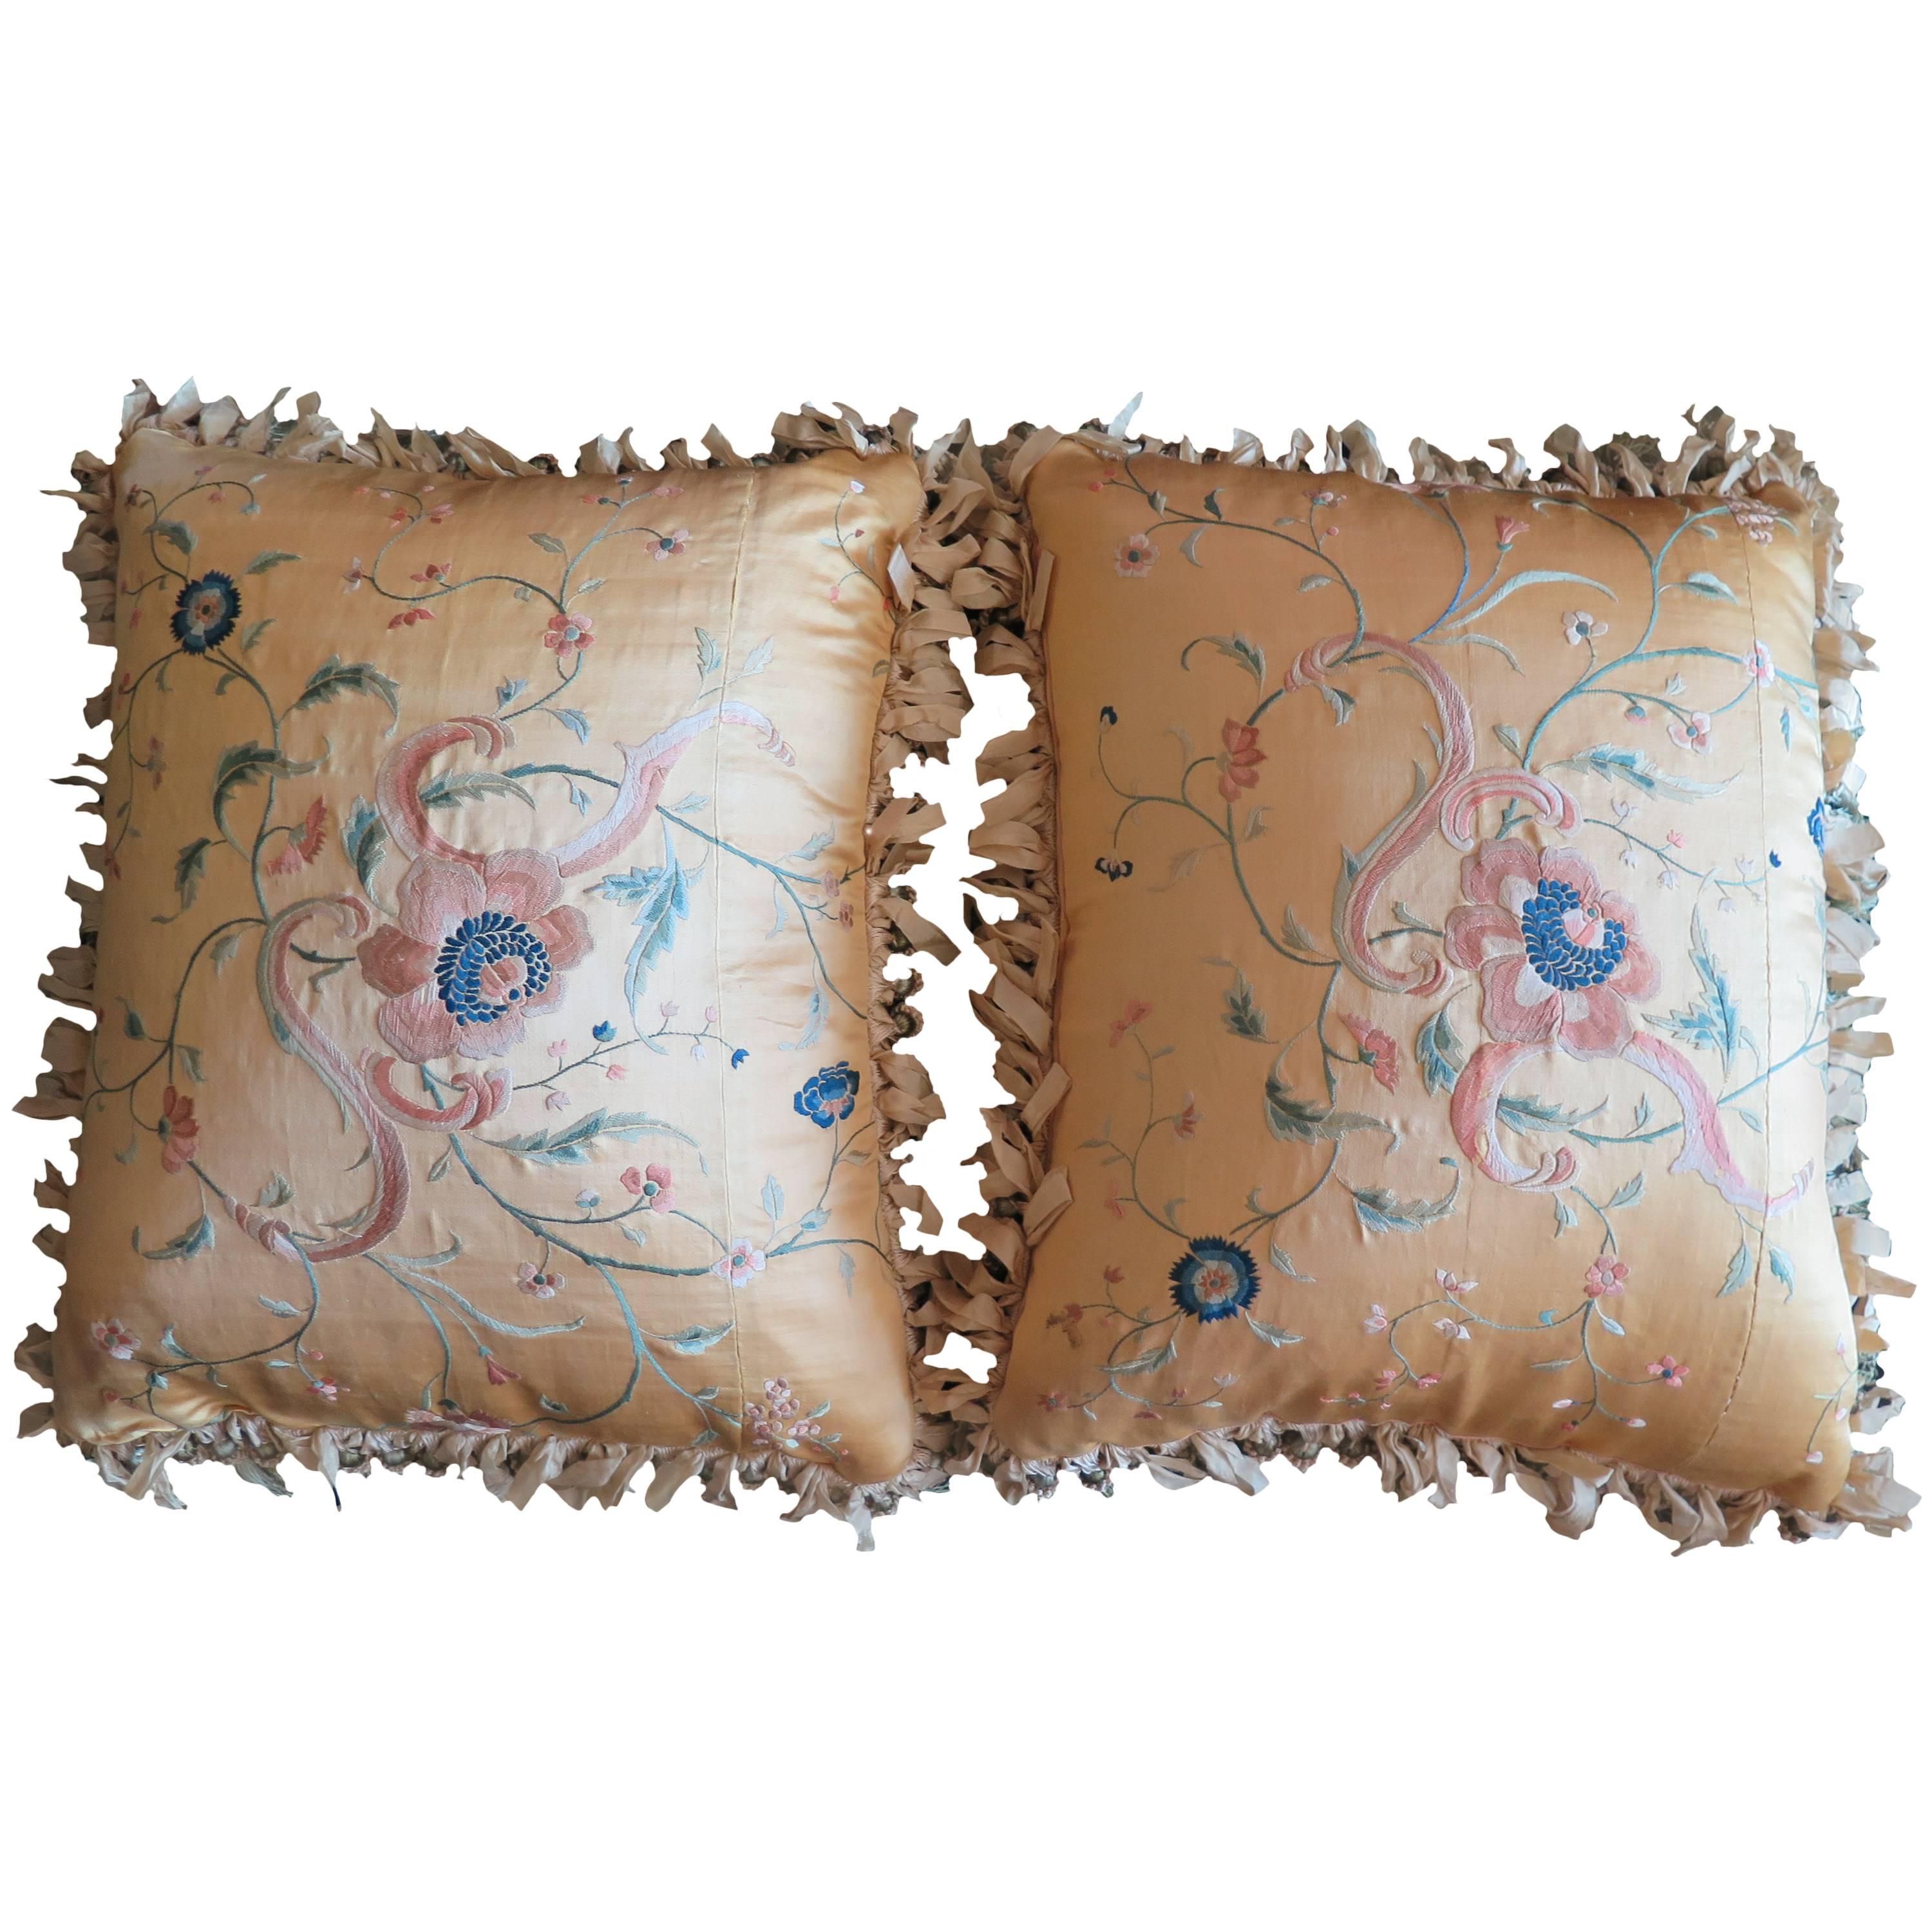 Exquisite Pair of Decorative Pillows For Sale